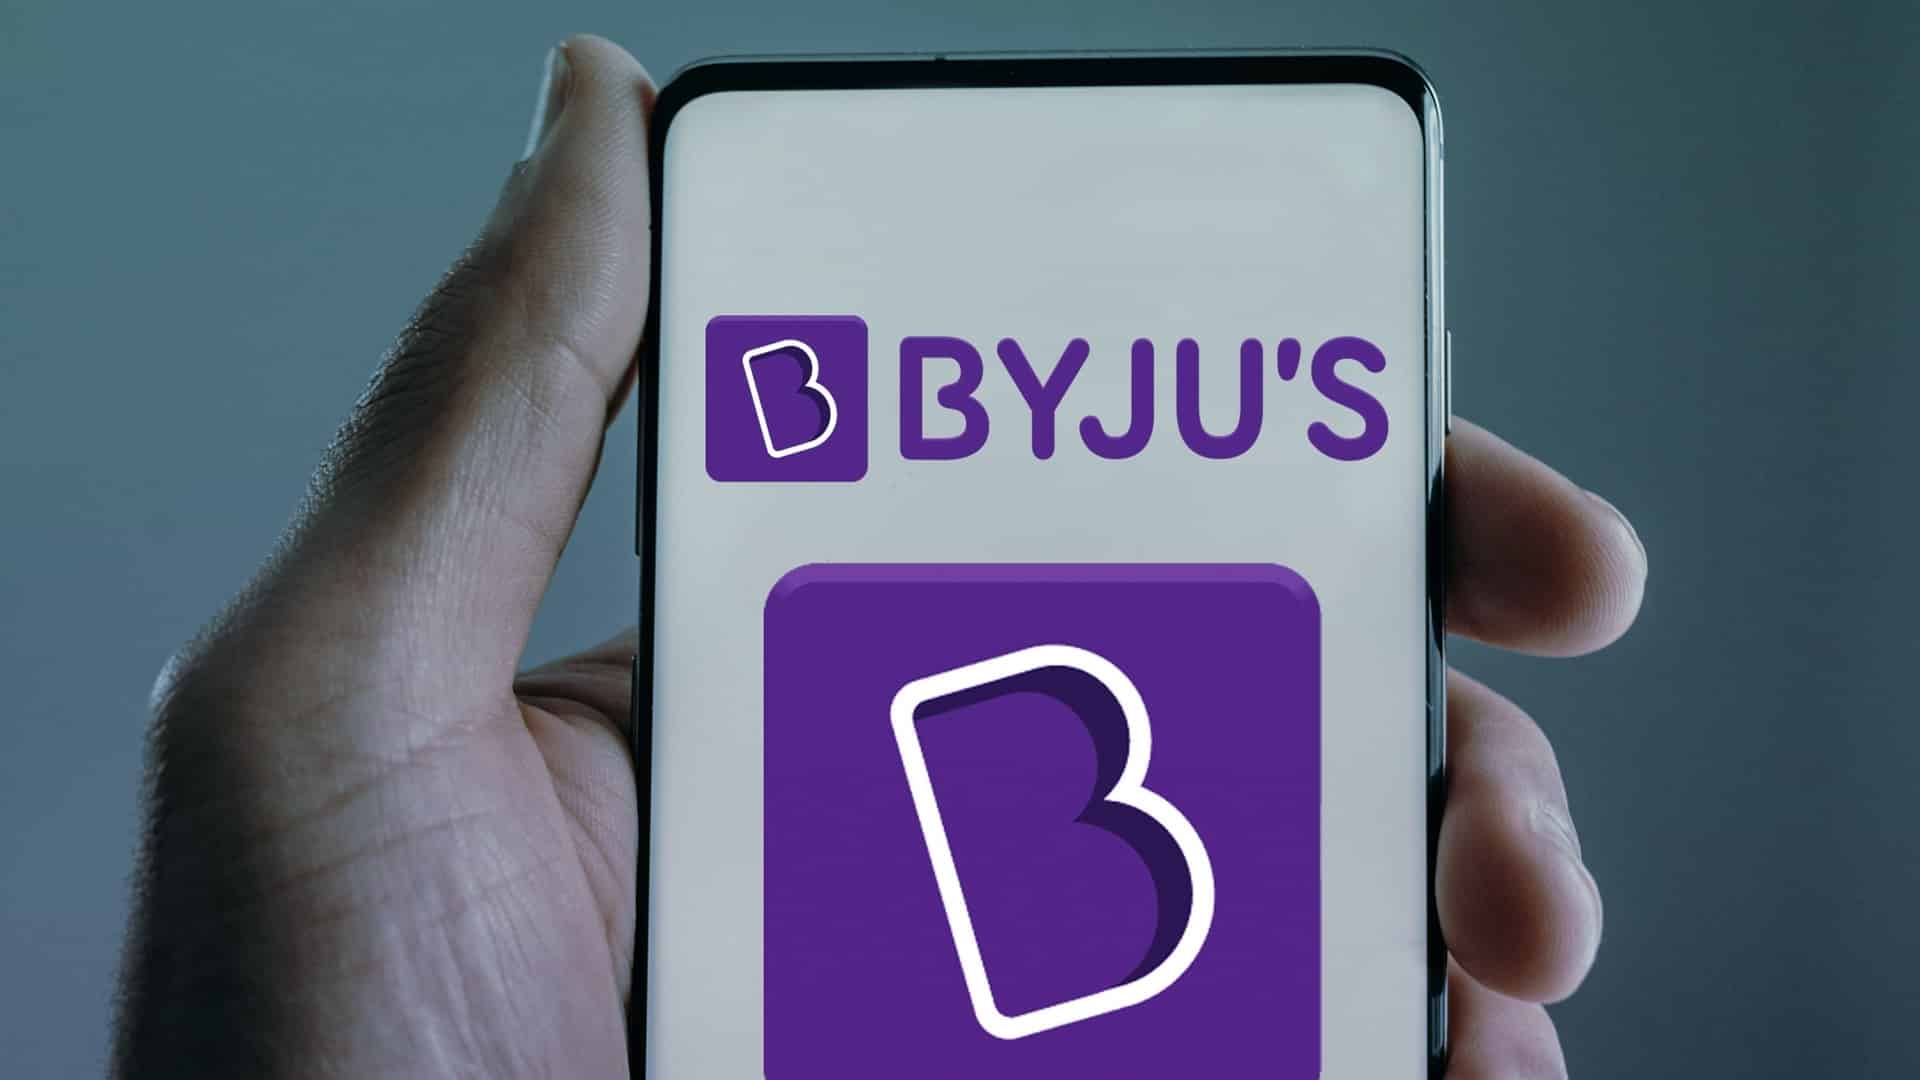 BYJU's lays off close to 1,000 employees across all departments